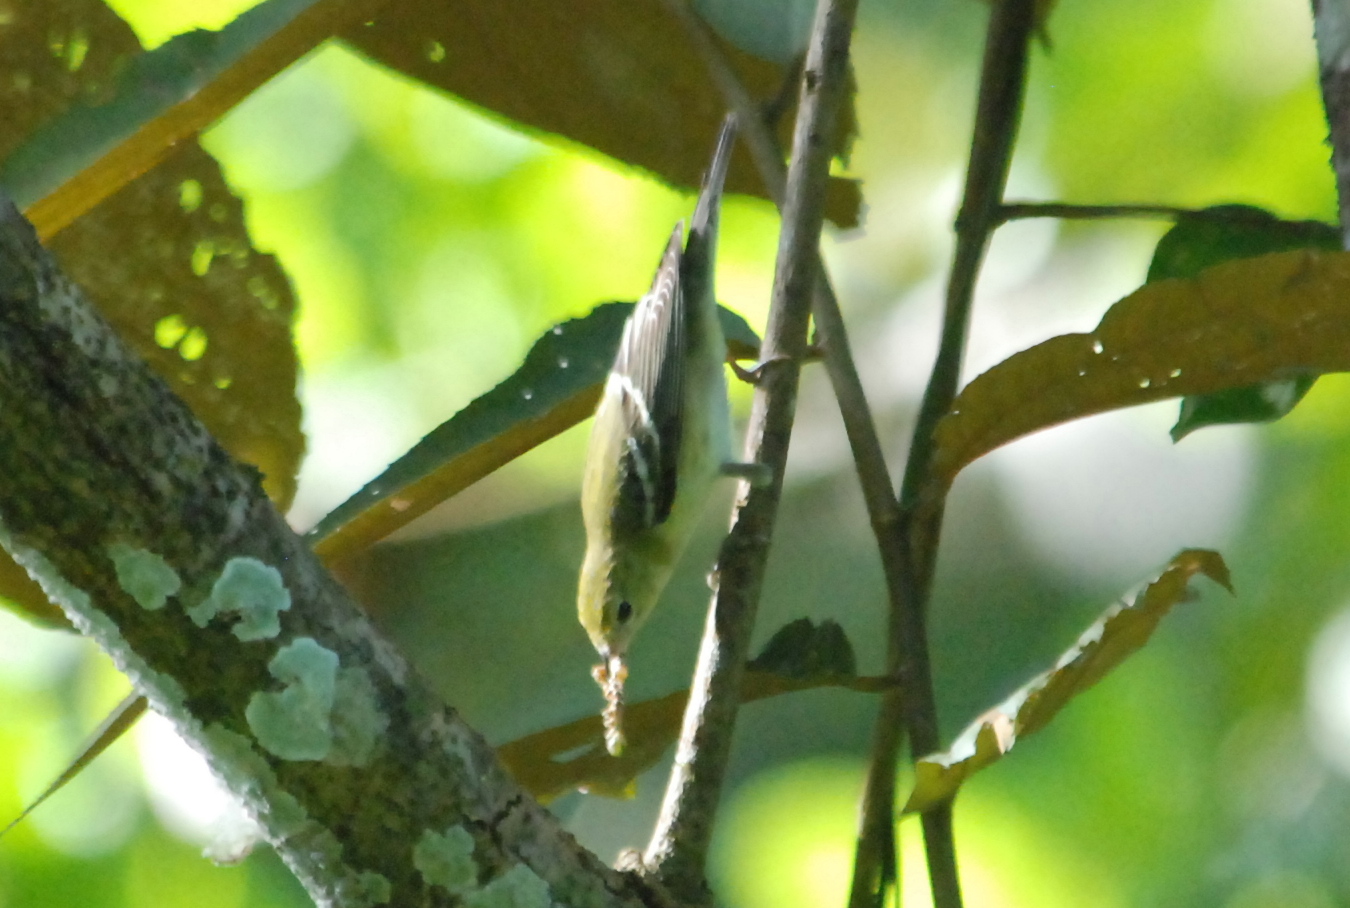 Click picture to see more Bay-breasted Warblers.